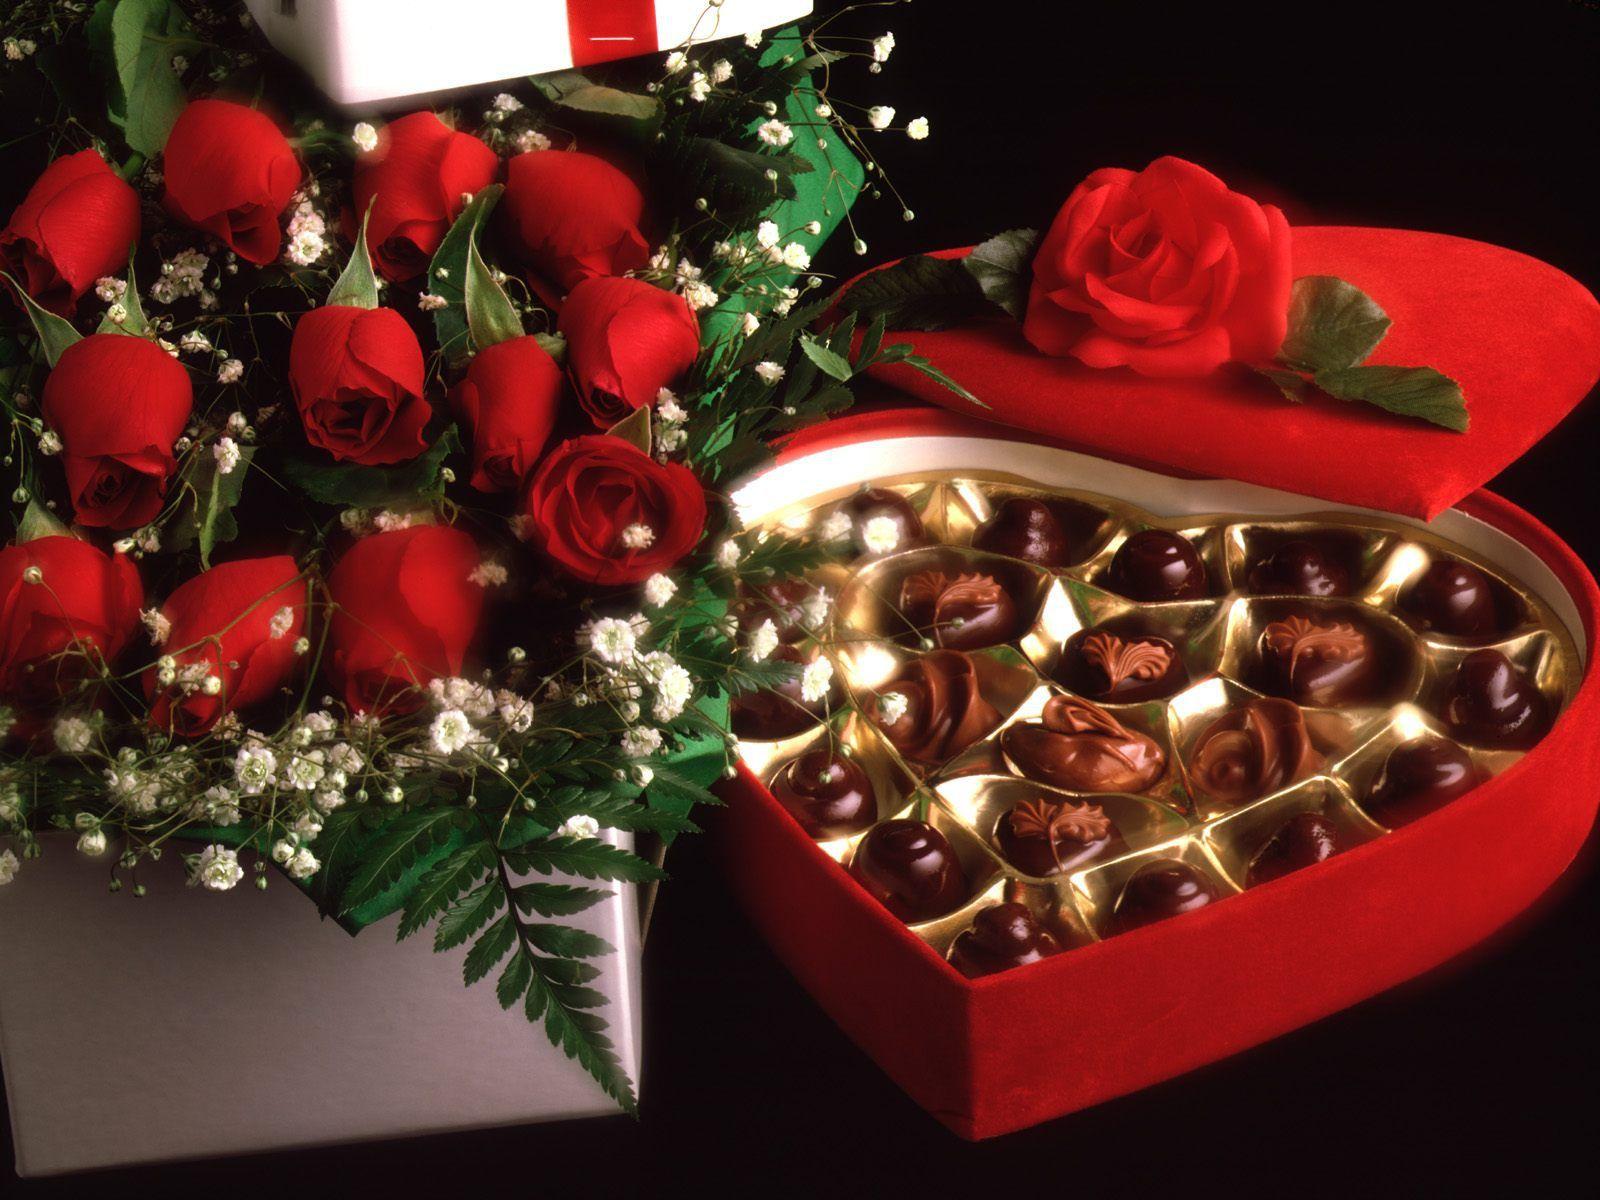 Red roses on March 8 with chocolates wallpaper and image